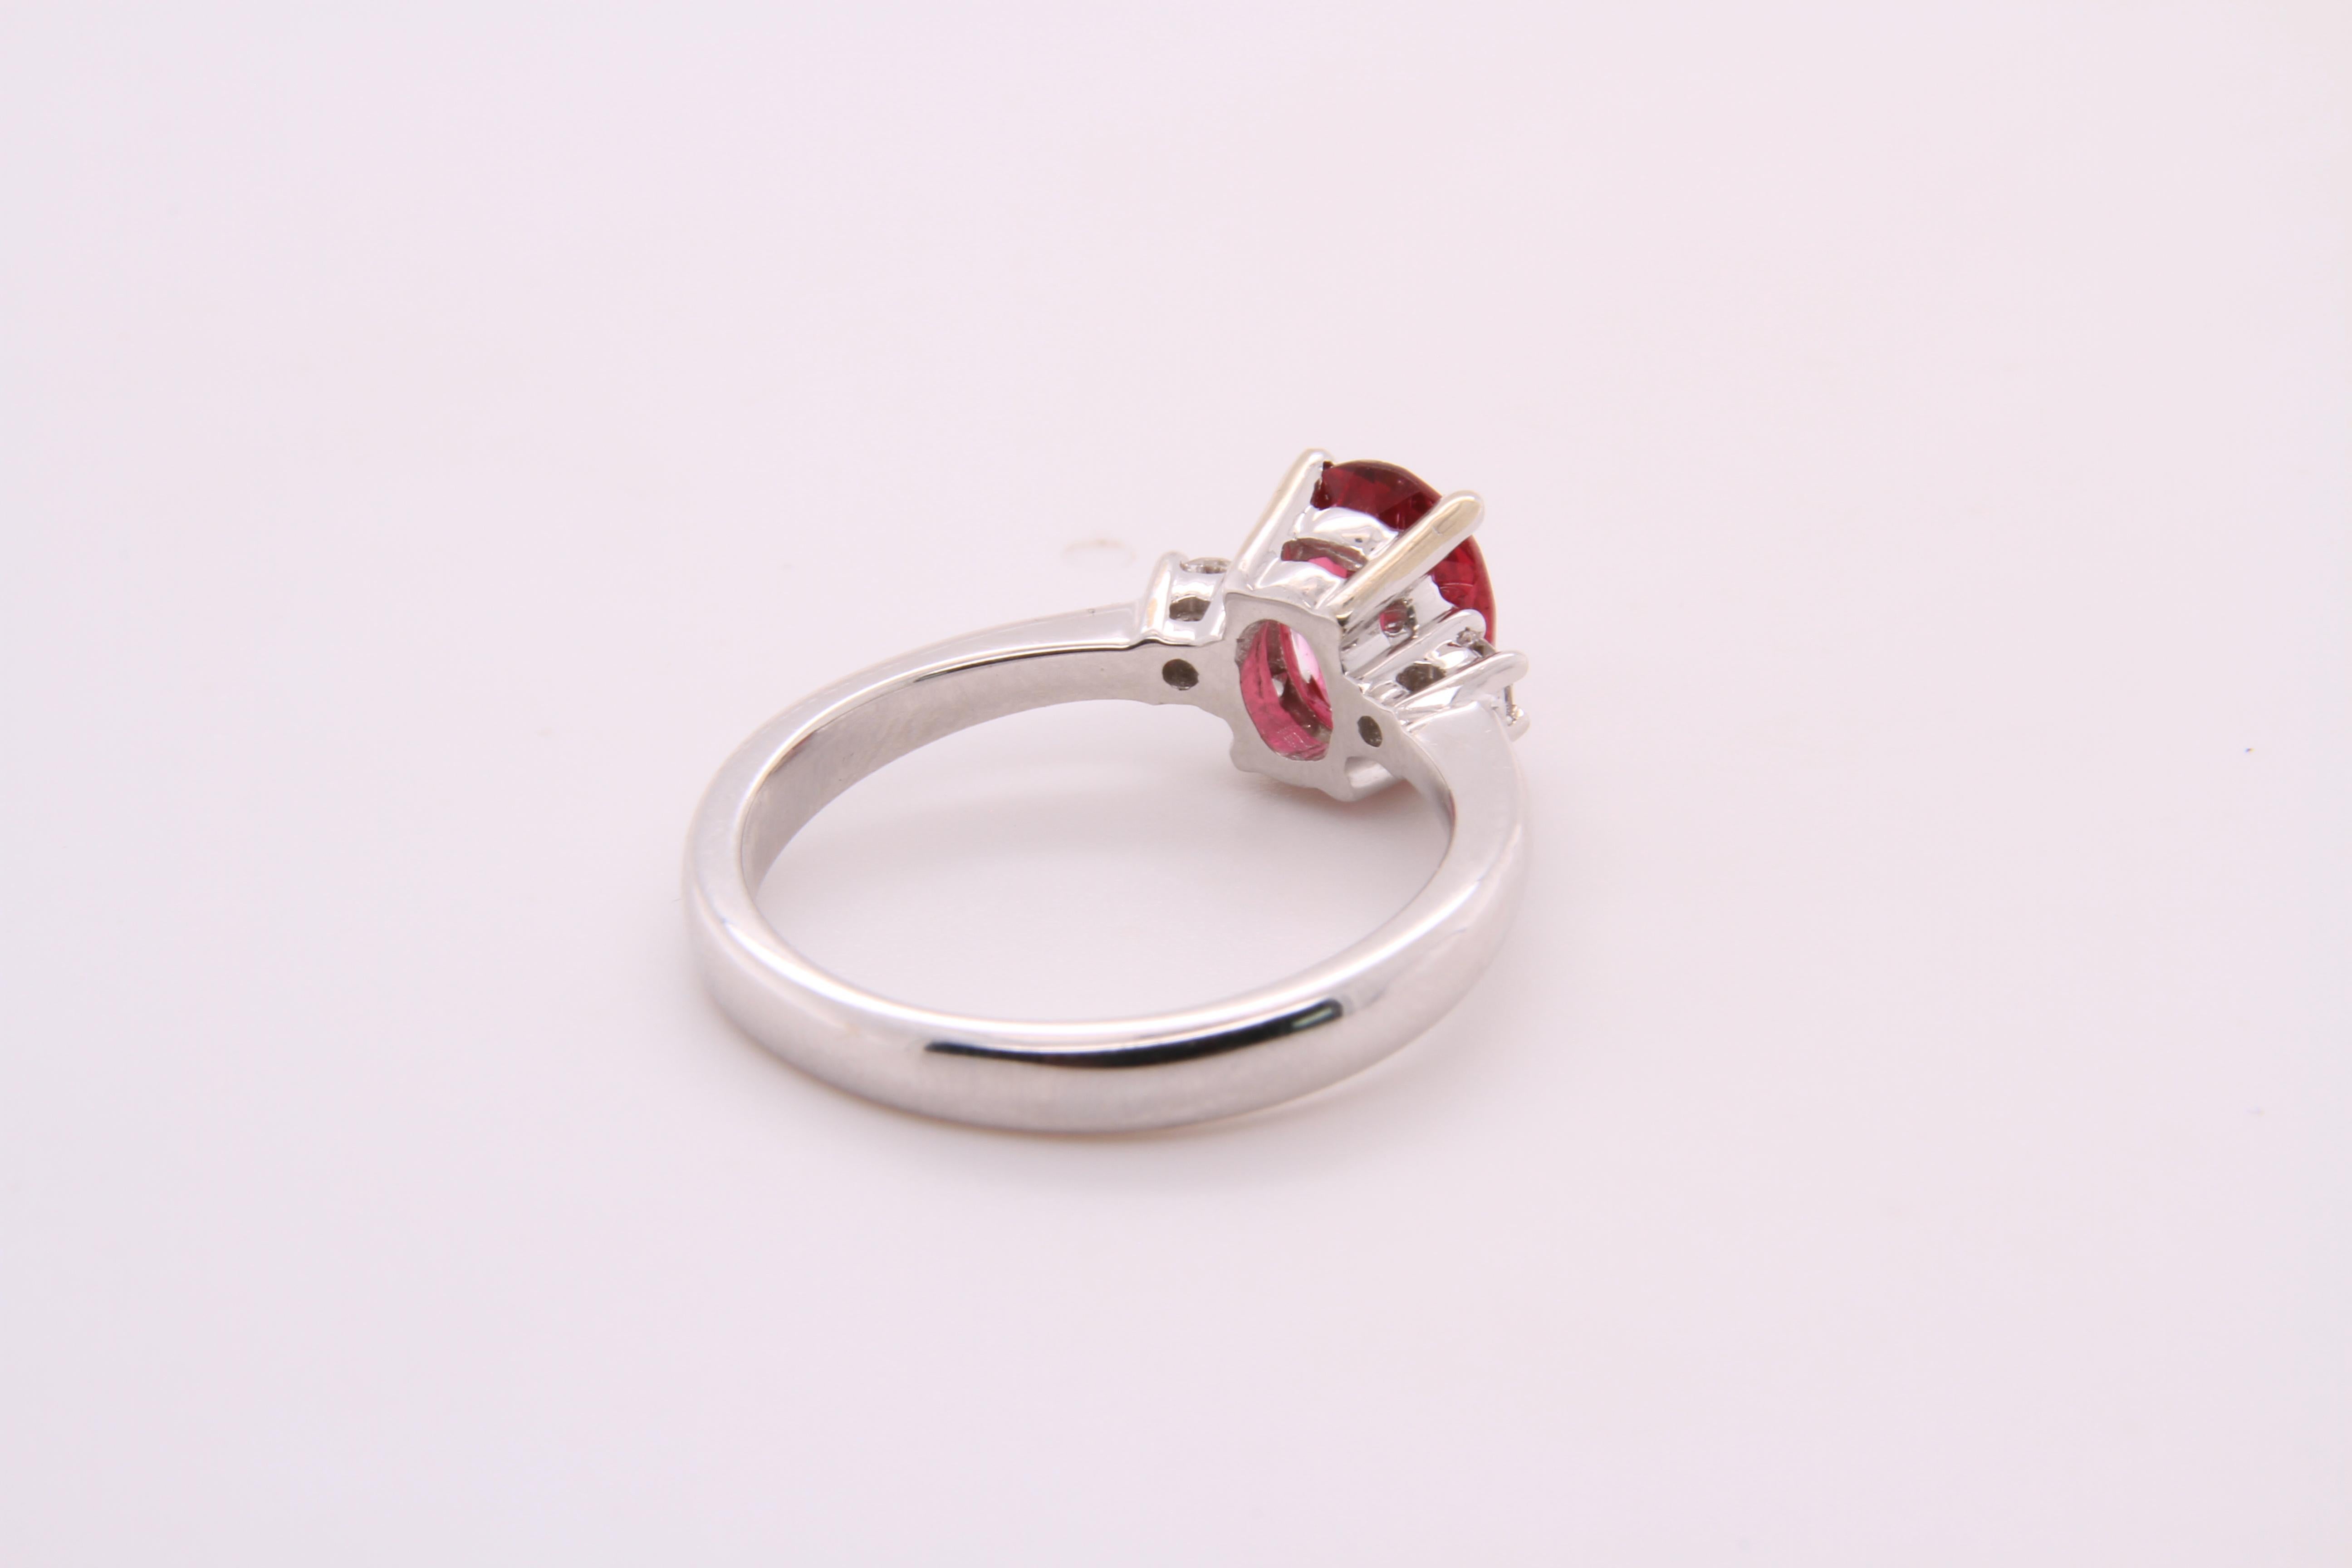 Bright, Pink, Oval Tourmaline Engagement Ring with Diamonds, 14K White Gold 4